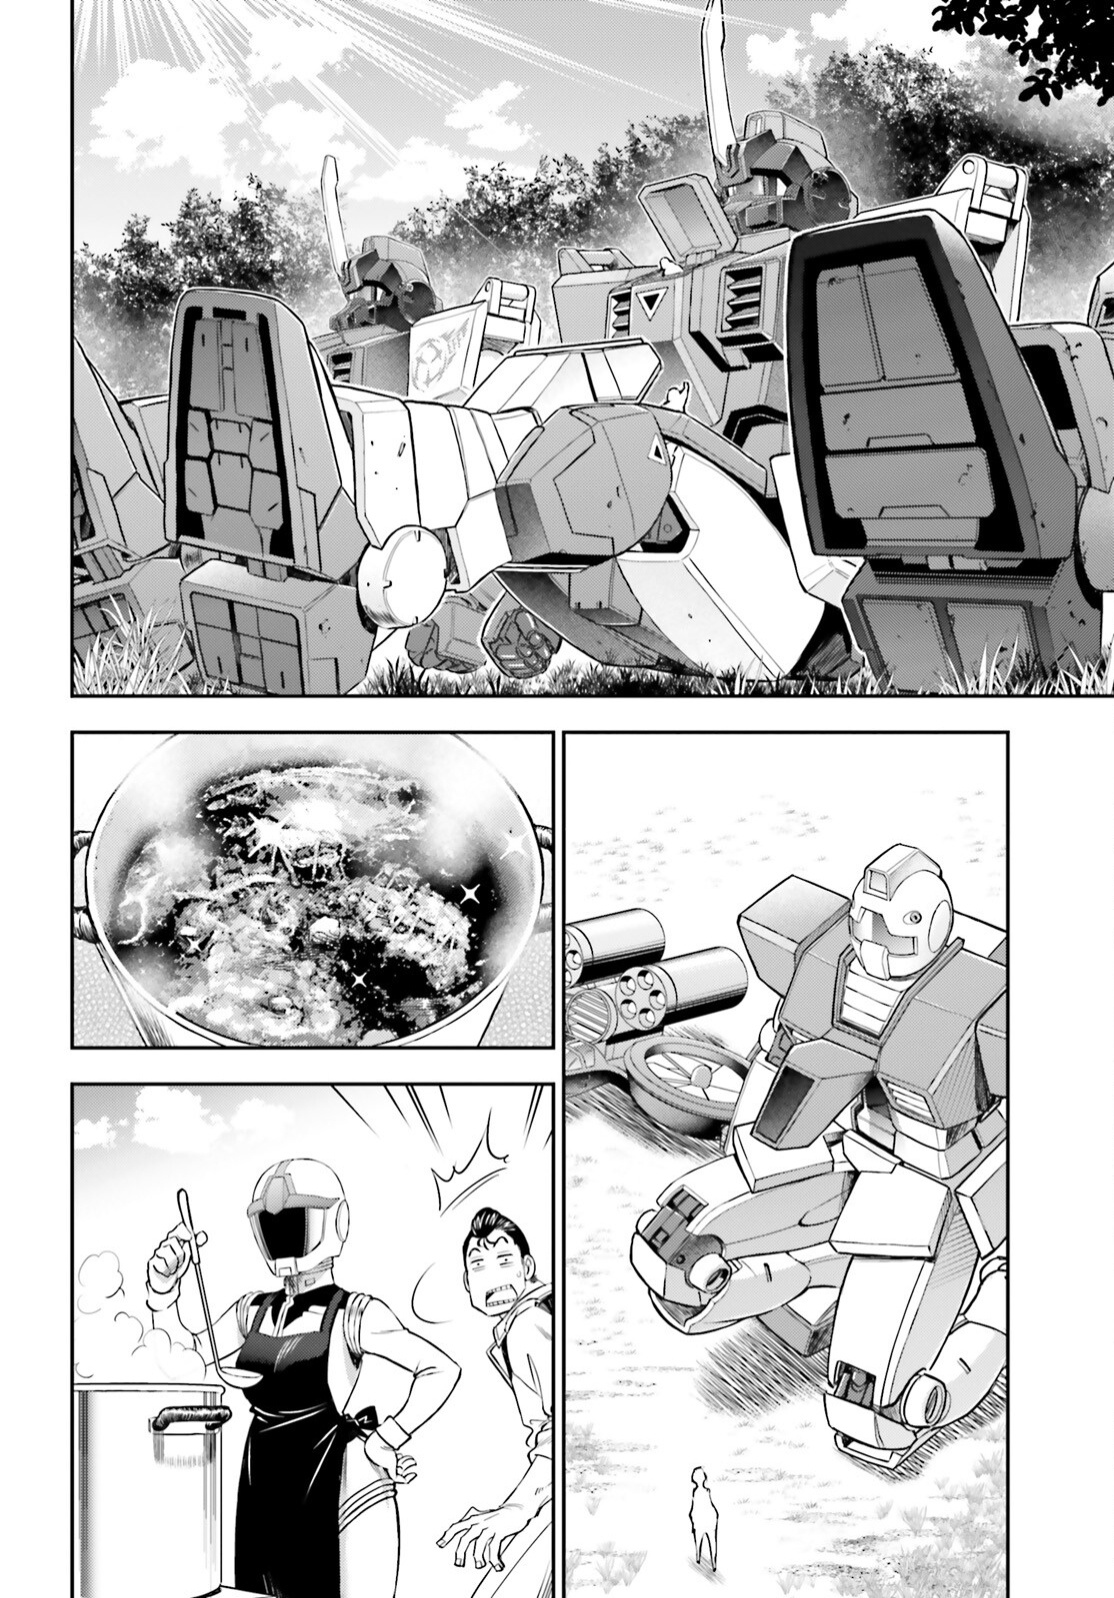 Mobile Suit Gundam: Red Giant 03Rd Ms Team - Page 2